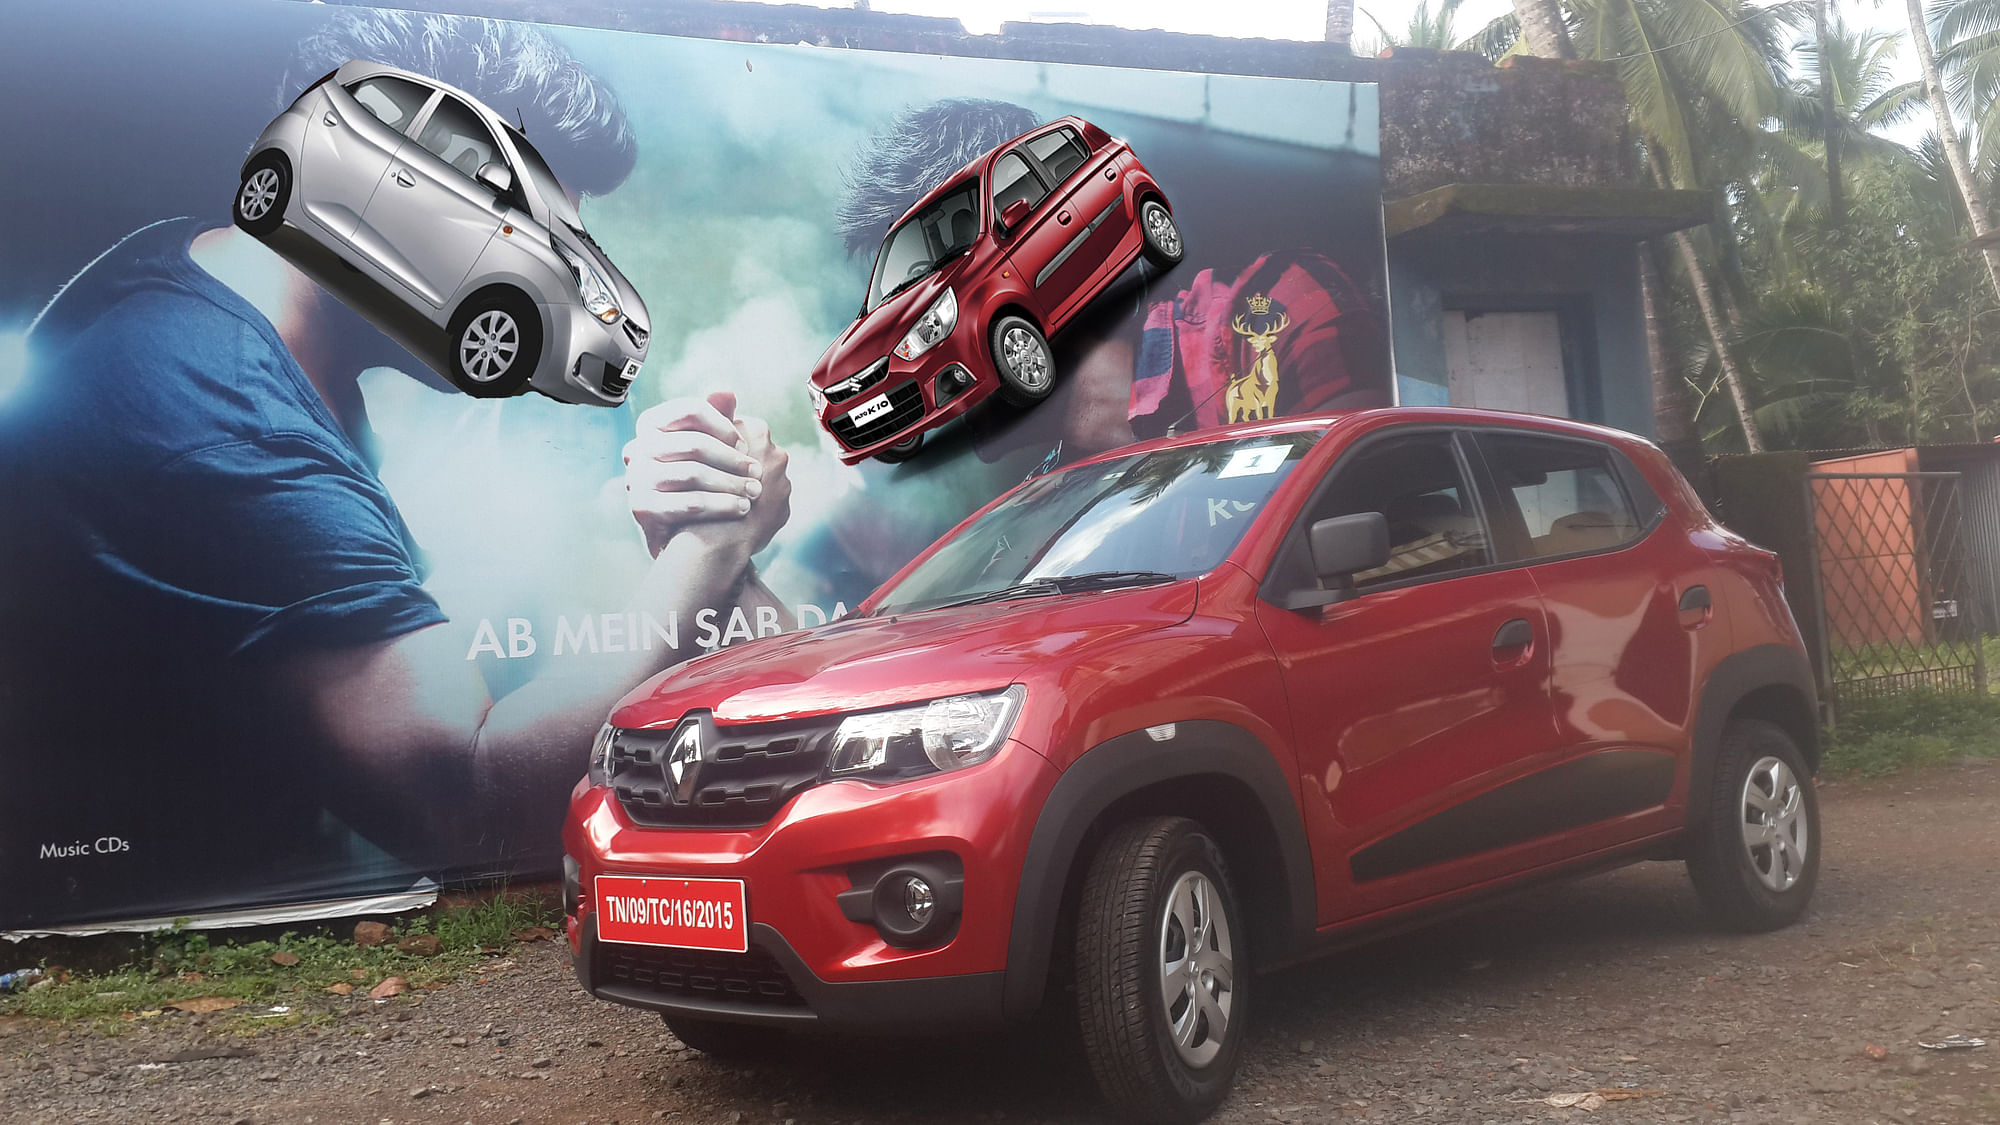 The Renault Kwid feels like it’s all set to take the Hyundai Eon and Maruti Alto K10 by the horns. (Photo: The Quint)